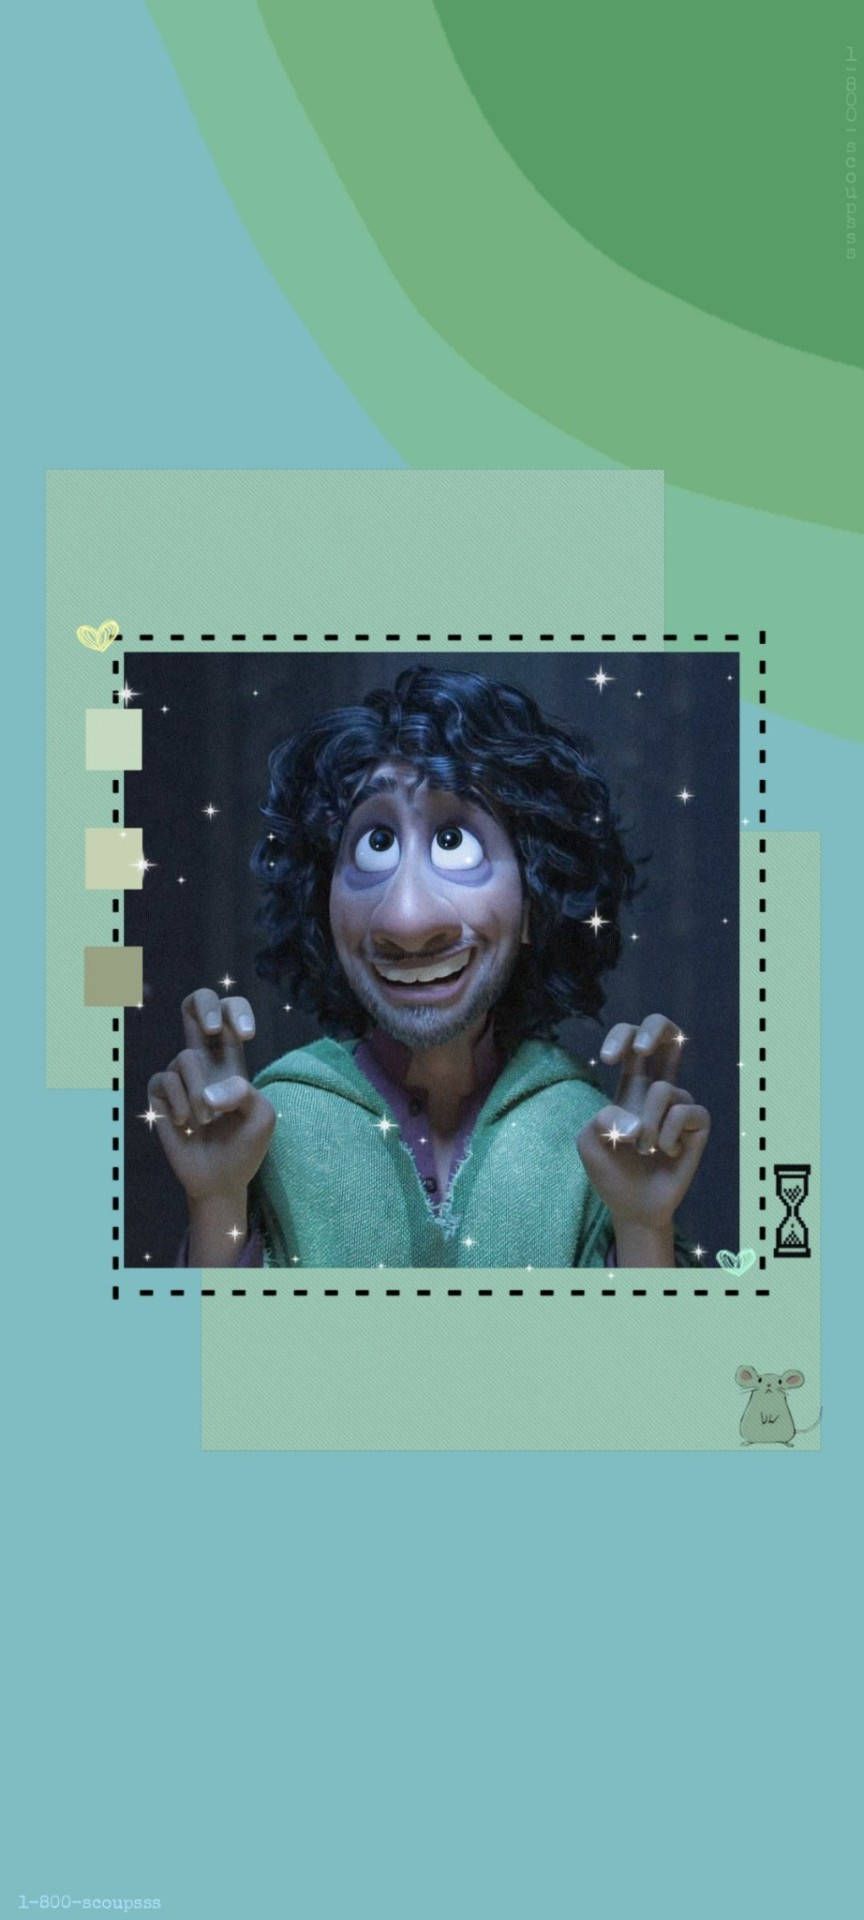 A postage stamp with an image of the muppet character - Encanto